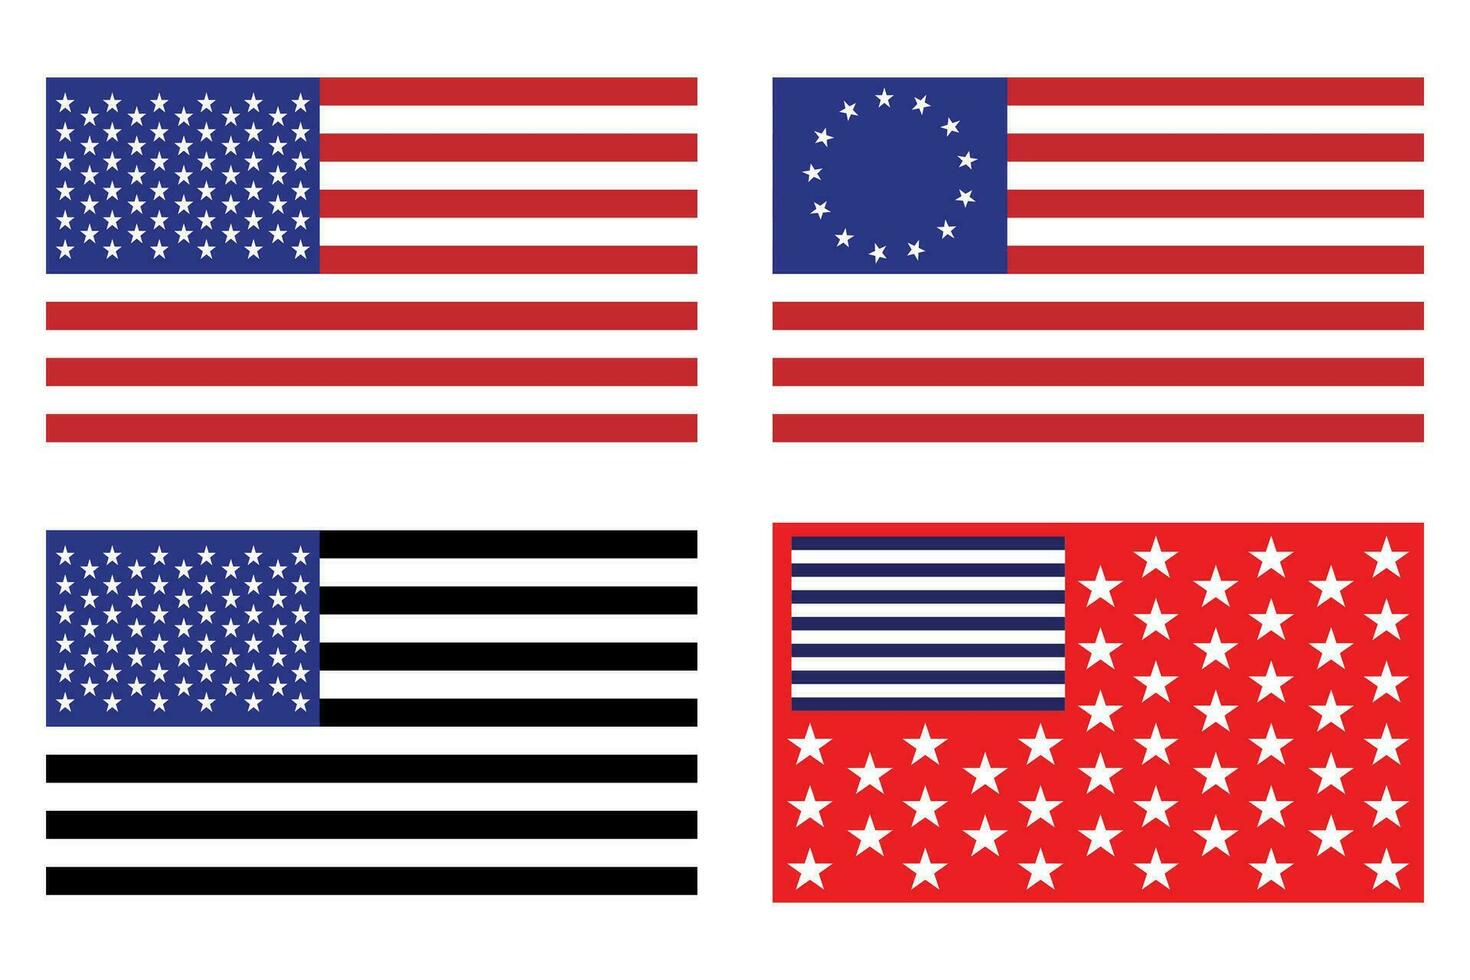 Flag of the United States of America, American flag photos vector illustration.